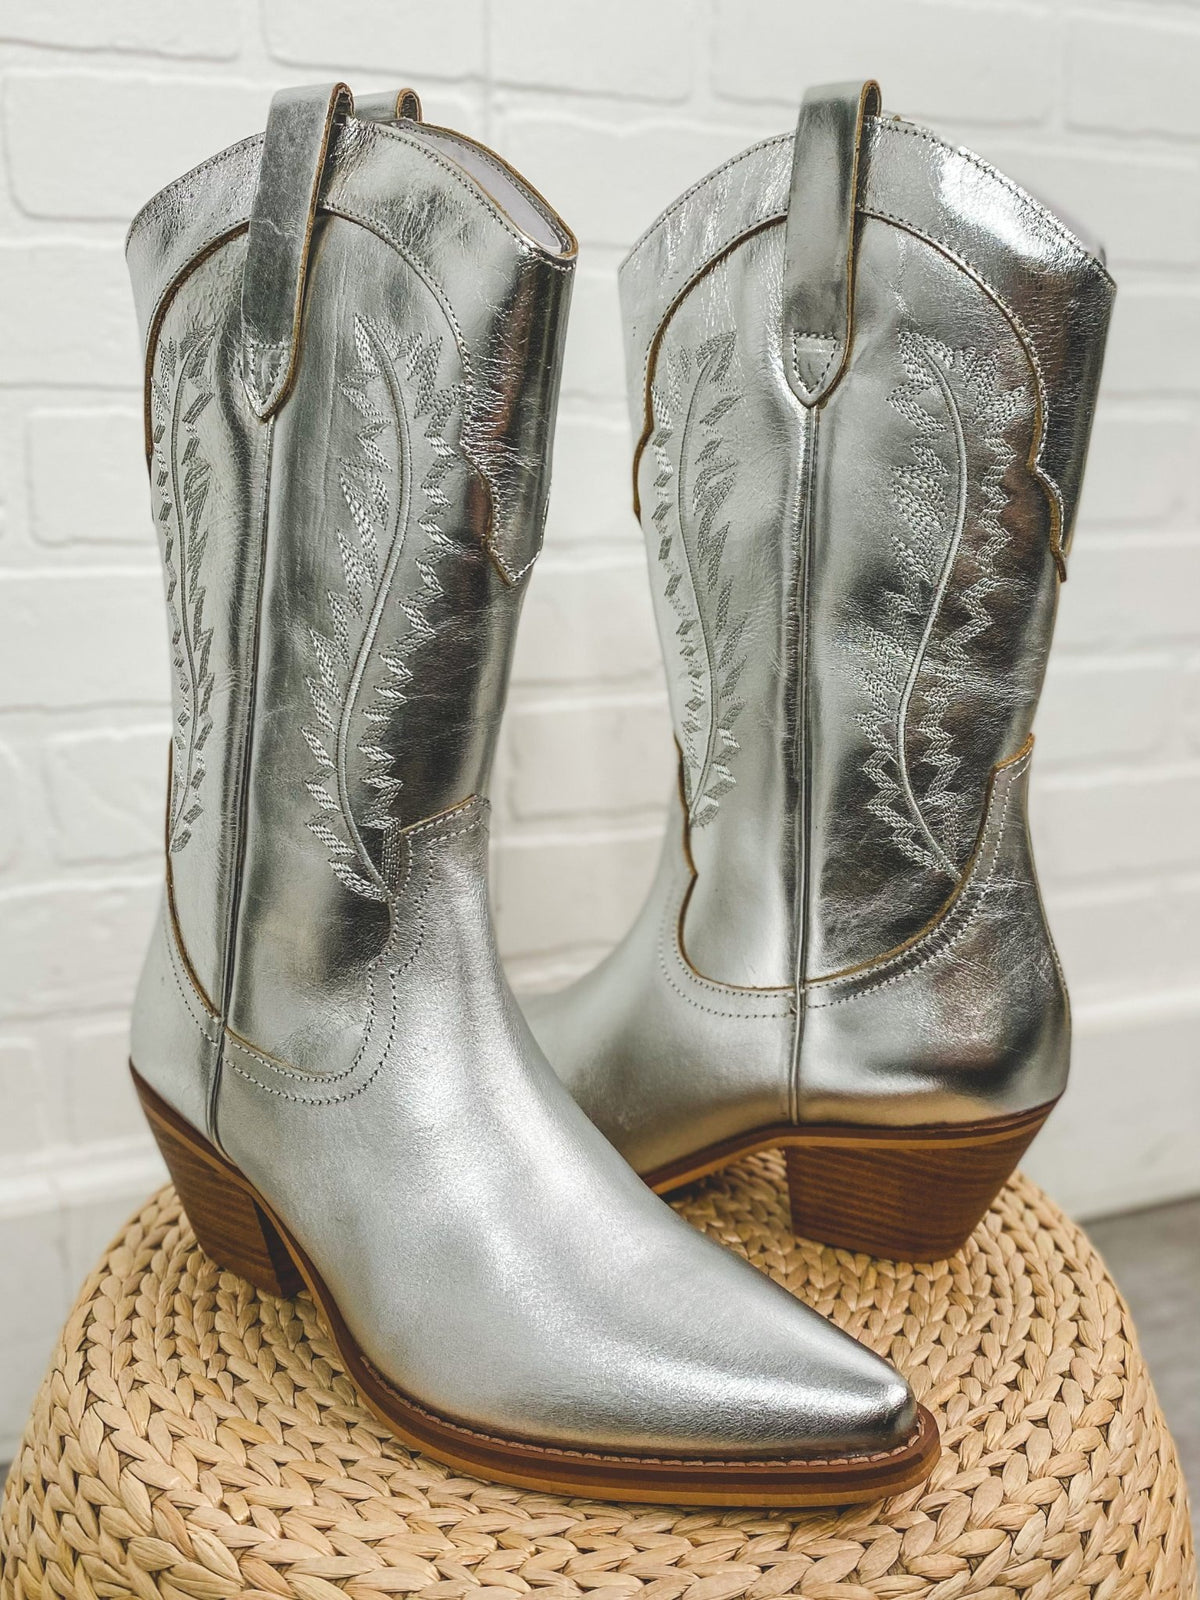 Mylie metallic cowboy boot silver - Cute Shoes - Trendy Shoes at Lush Fashion Lounge Boutique in Oklahoma City